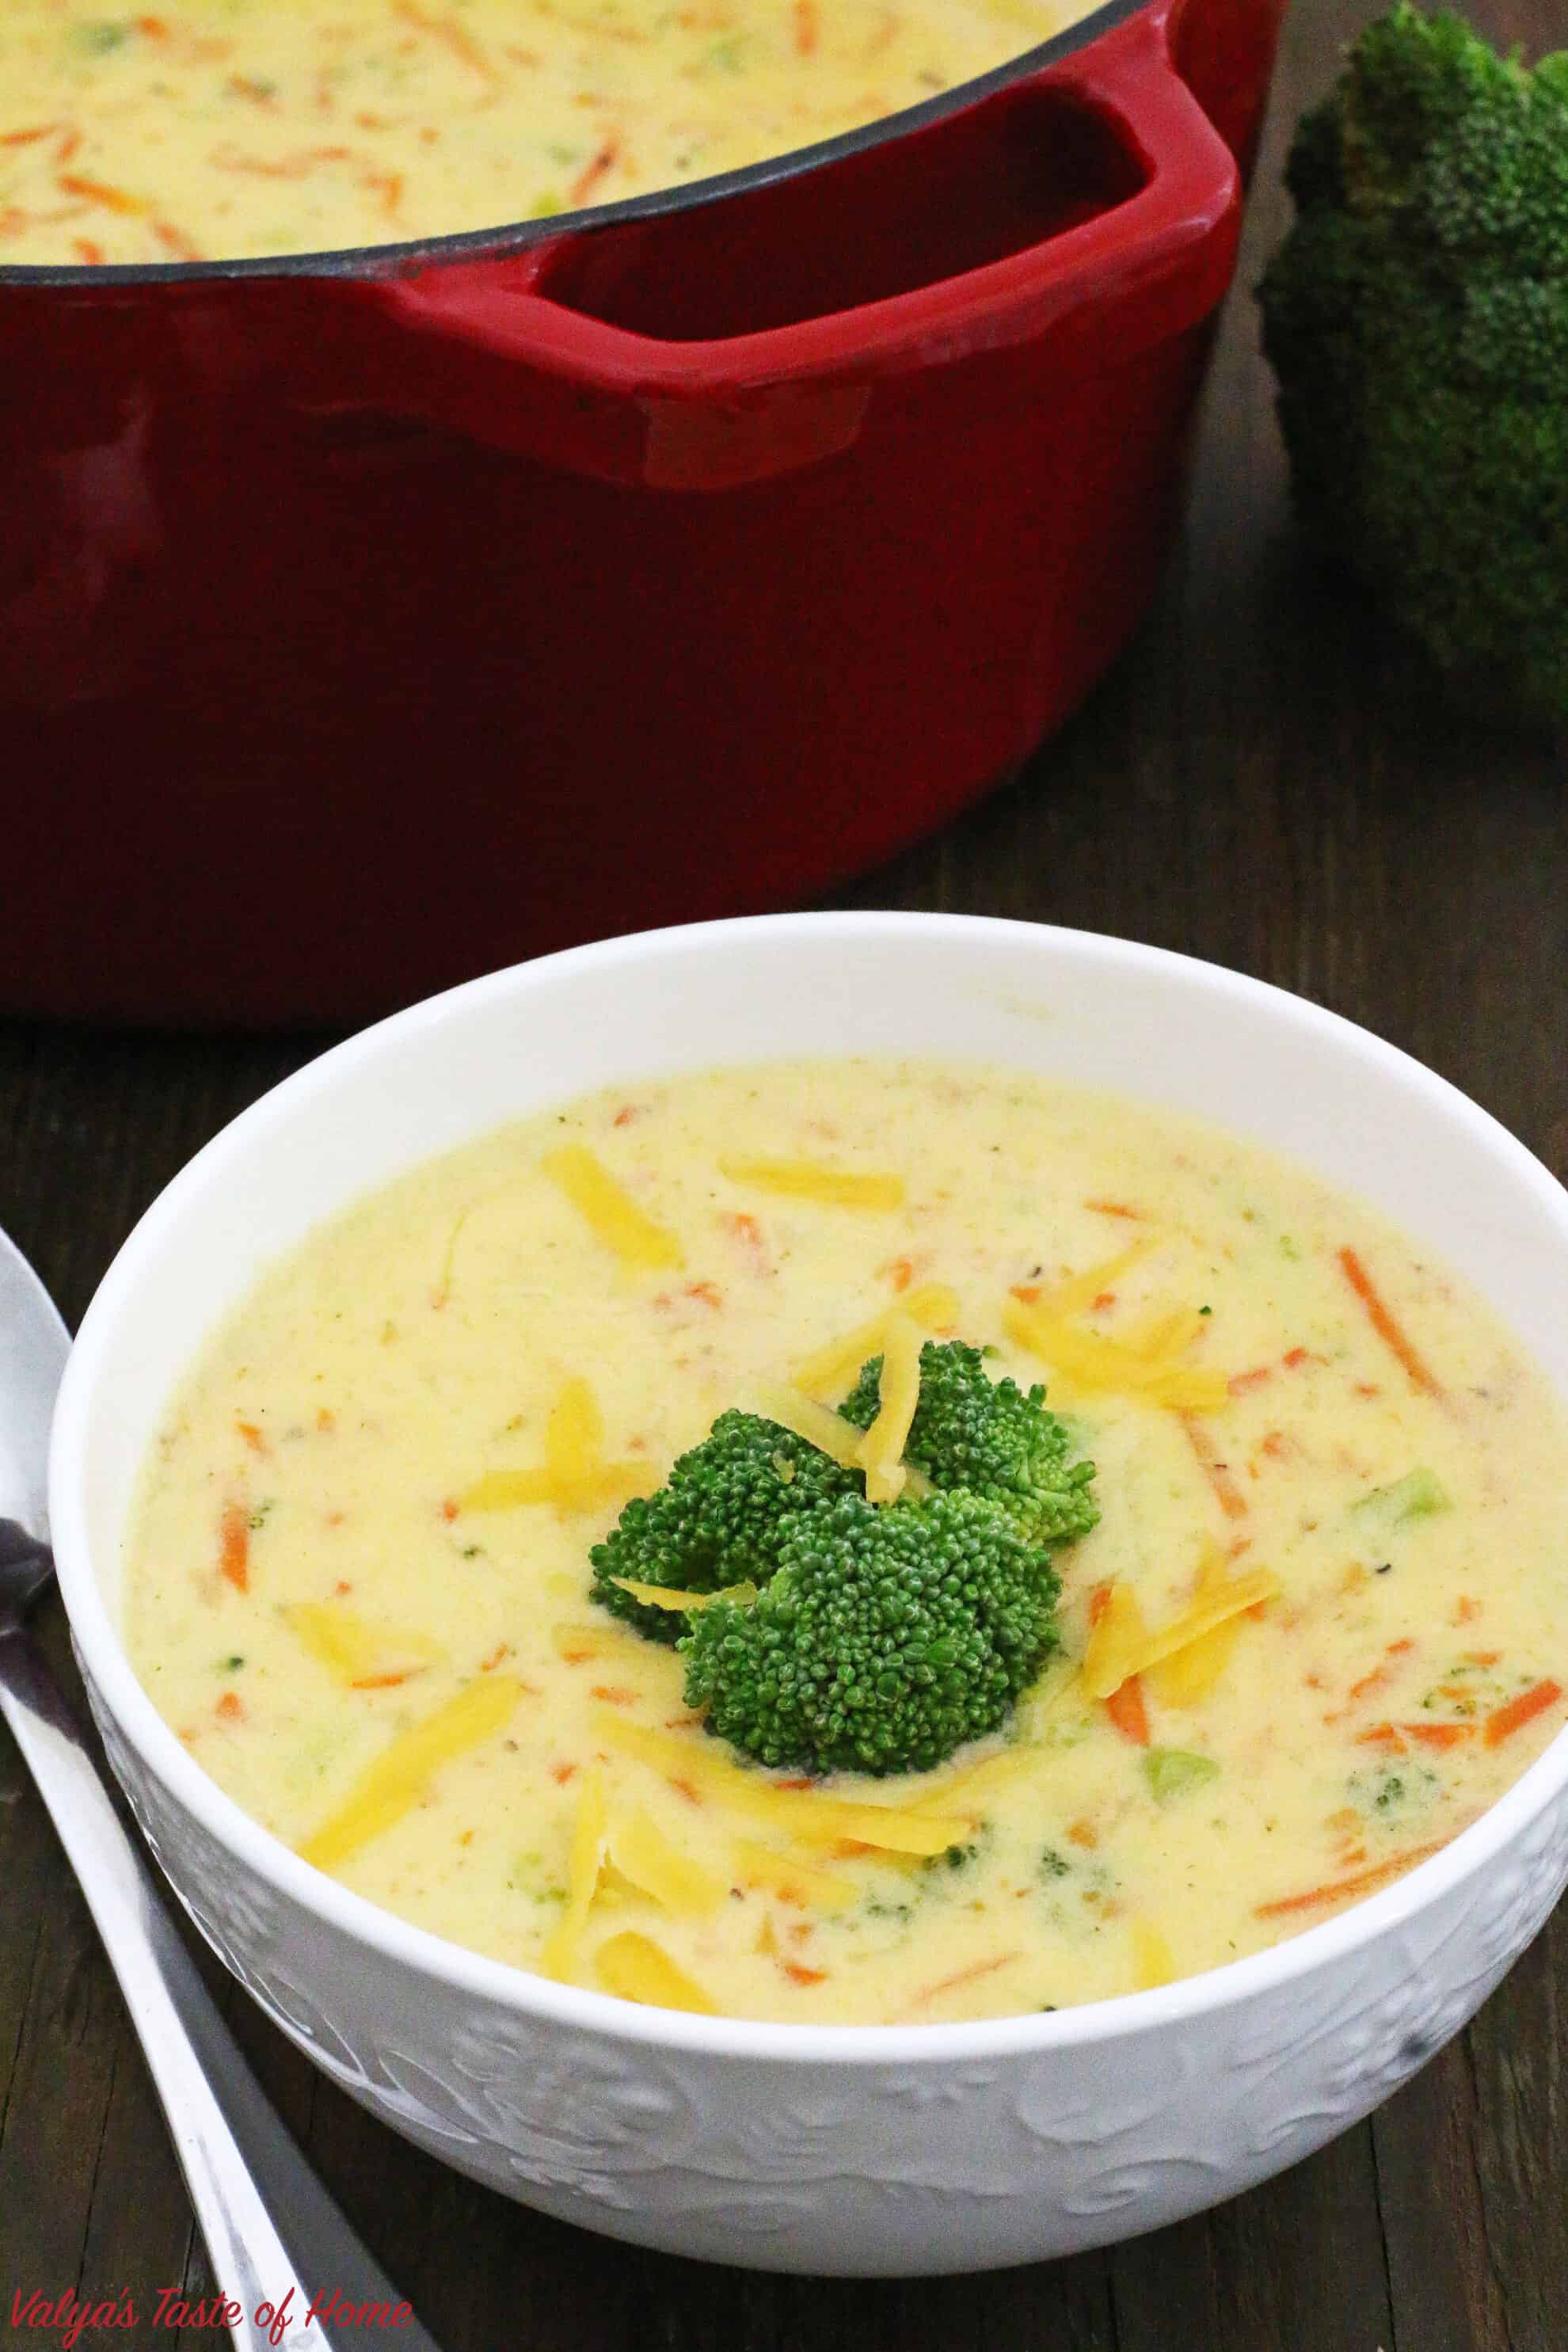 Easy Broccoli and Cheddar Soup (Video) « Valya's Taste of Home